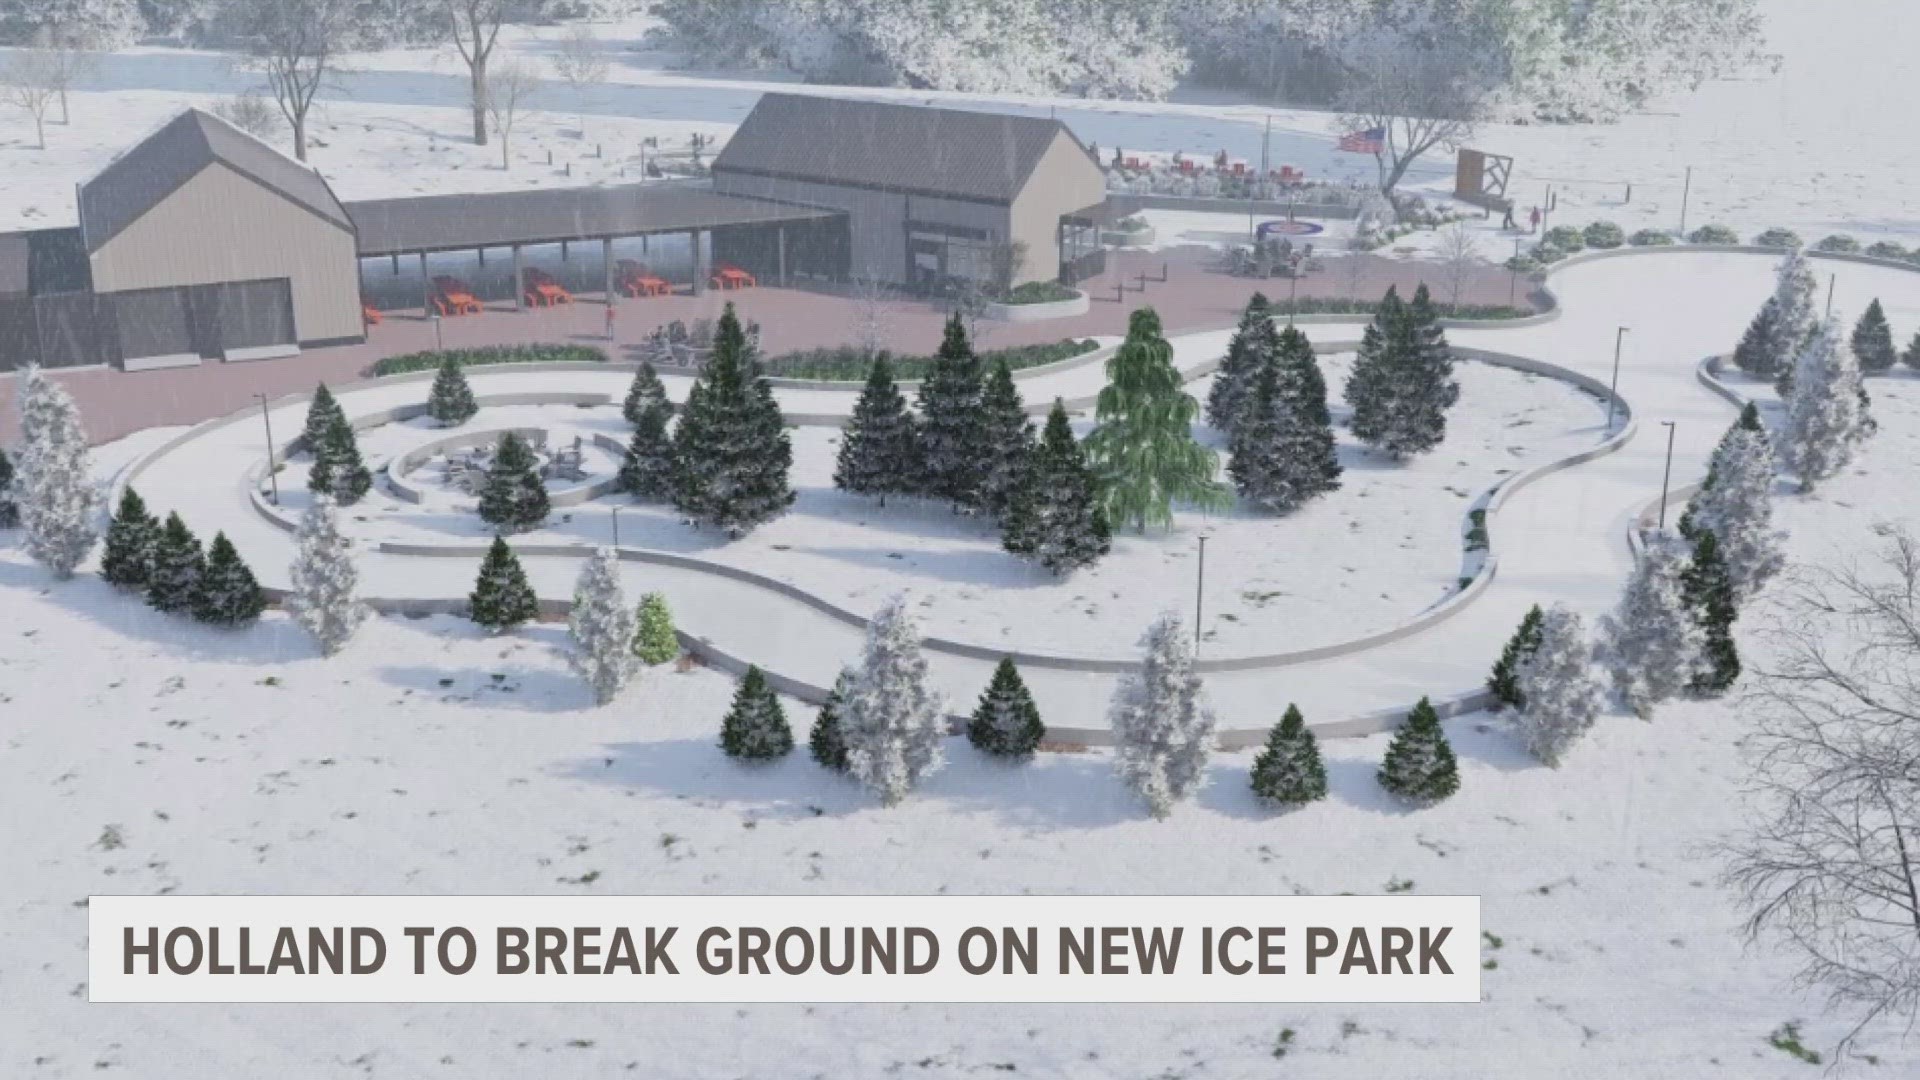 The $11 million ice park will include a circular ice rink with a curved pathway, fire pits and a curling rink. The city said the park will provide year-round use.